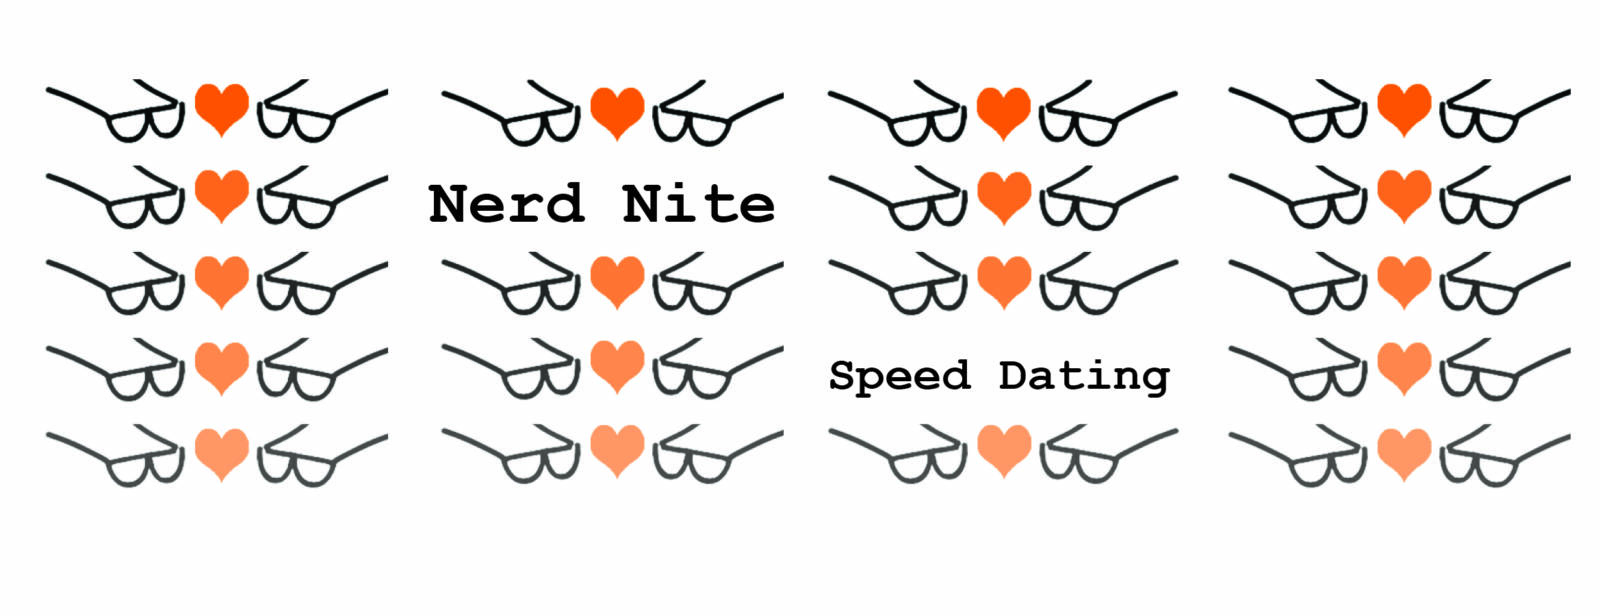 speed dating chicago nerds goes